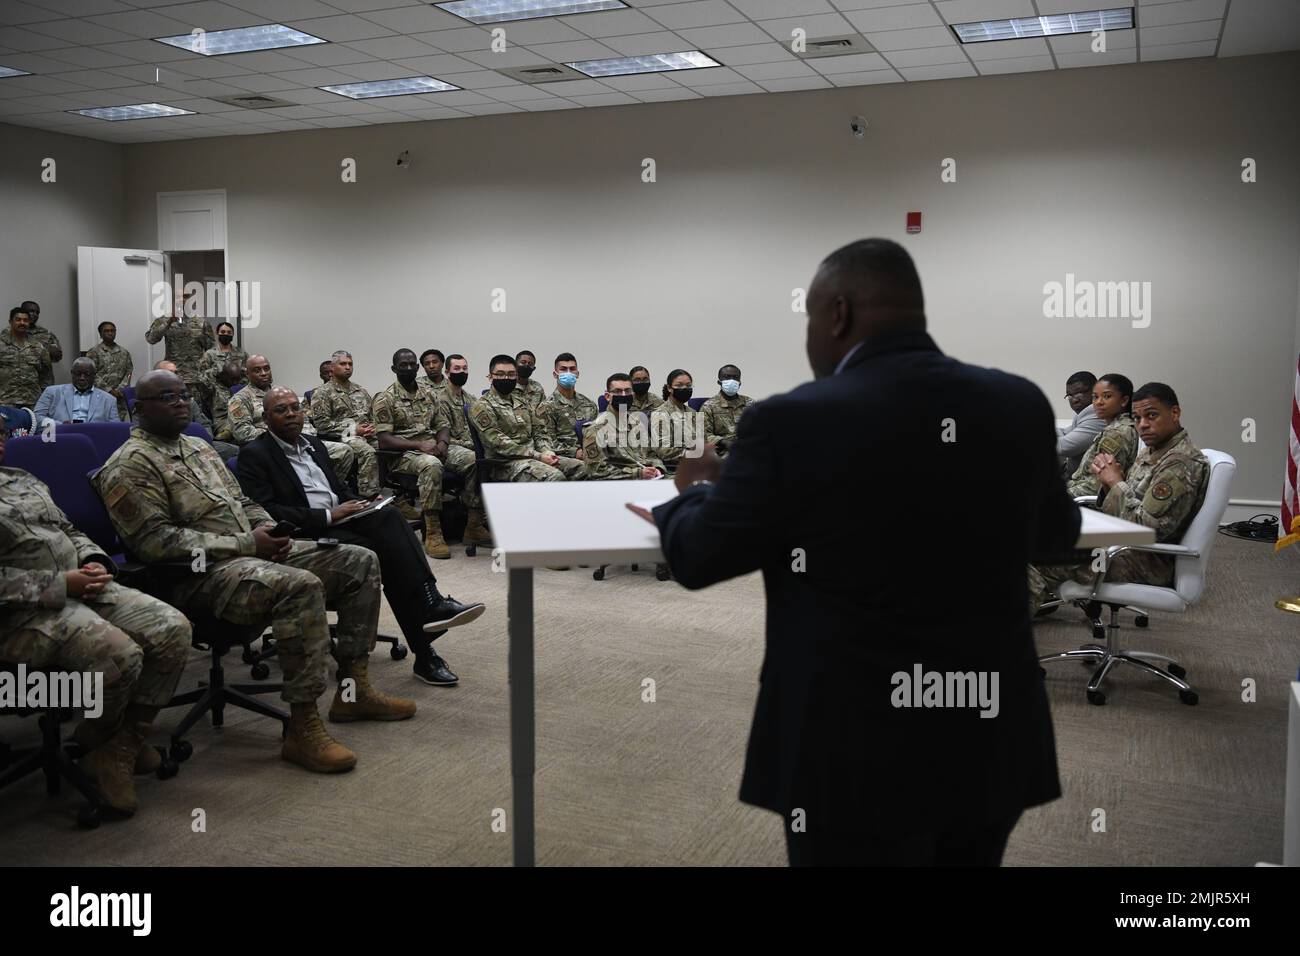 Dex McCain, retired Air Force officer engaged with the panel and audience by moderating the session at the Historically Black Colleges and Universities mentorship event held at the TechMGM, Aug. 31, 2022. Stock Photo